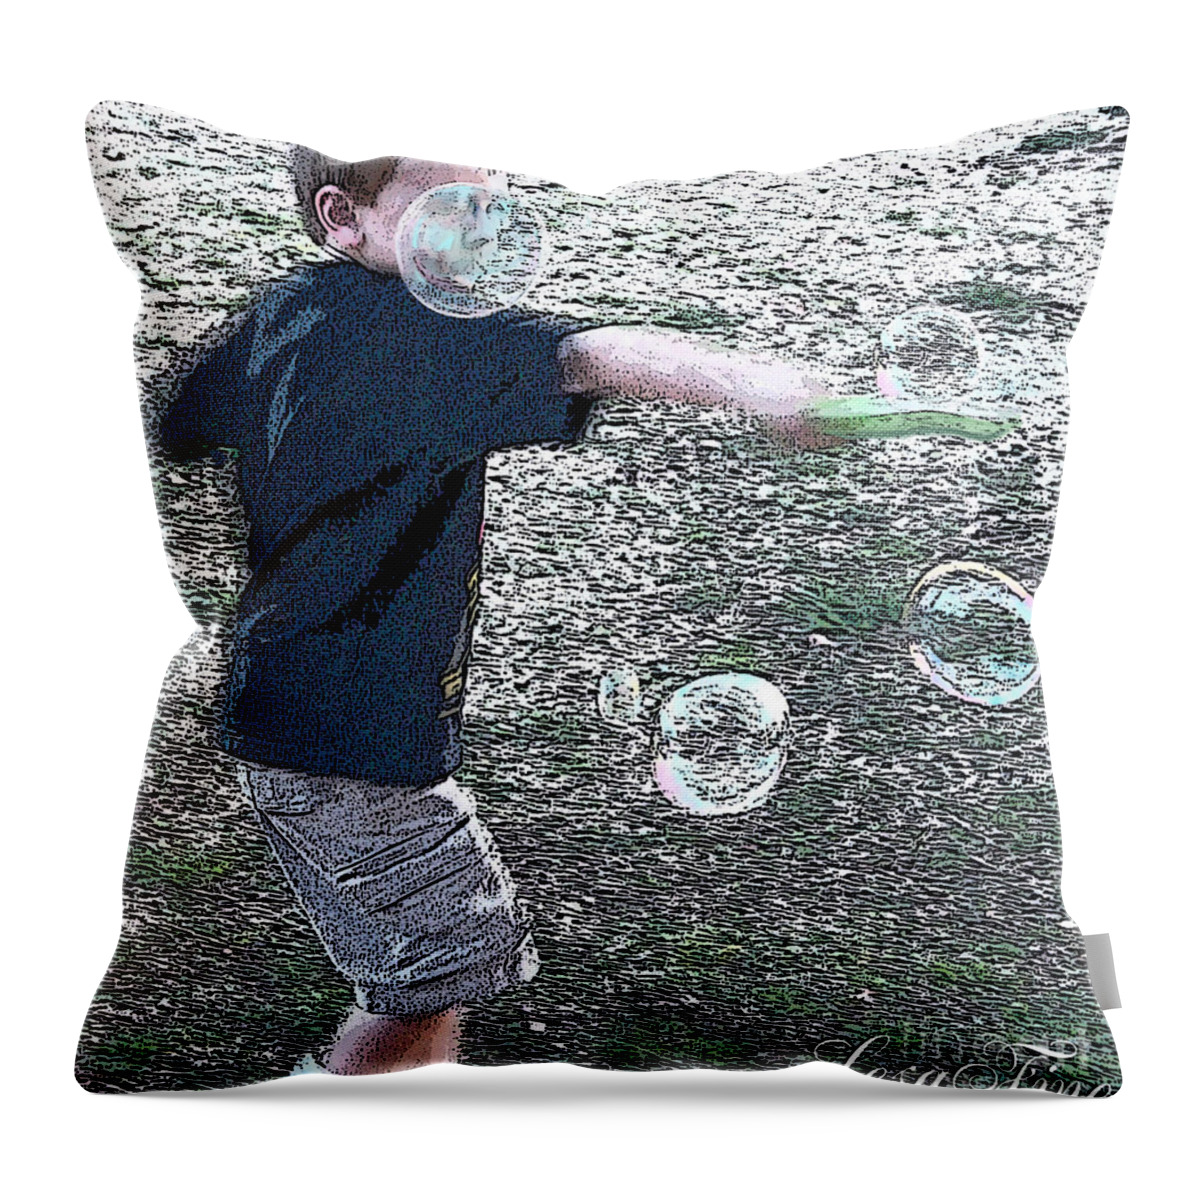 Bubble Throw Pillow featuring the photograph Throwing Bubbles by Lesa Fine